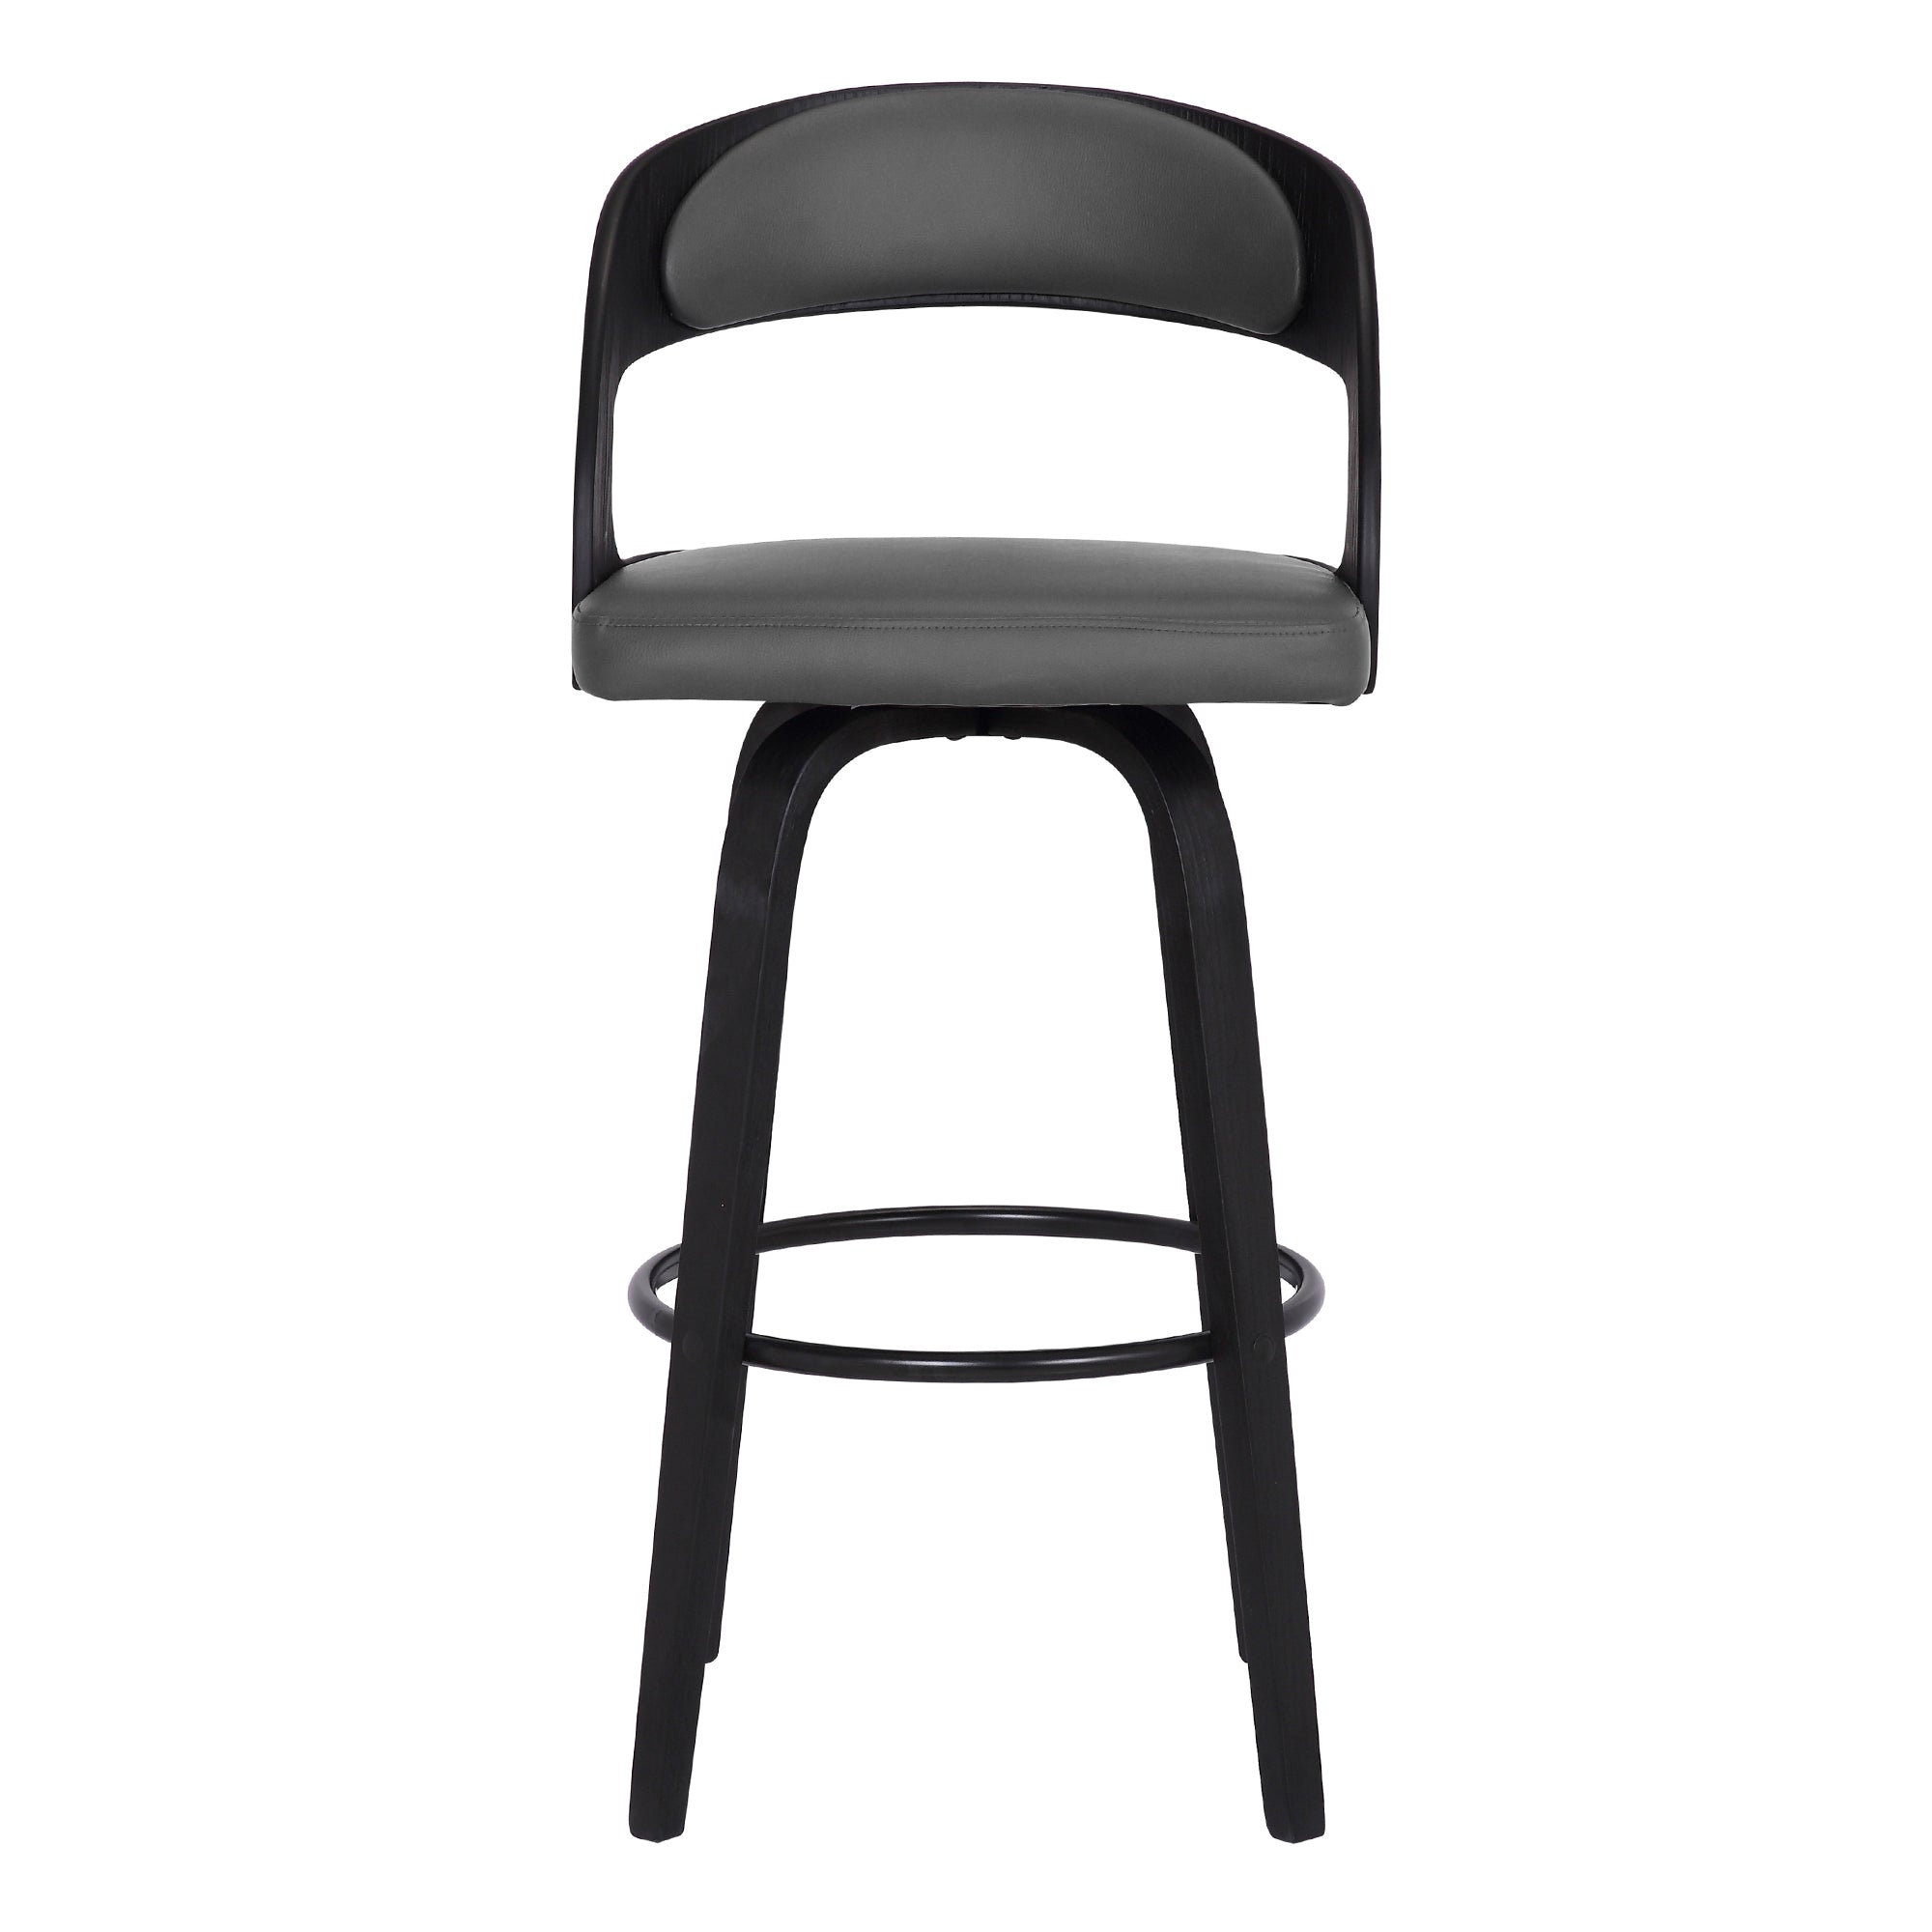 Shelly Contemporary Counter Stool or Barstool Swivel Barstool in Black Brush Wood Finish and Grey Faux Leather